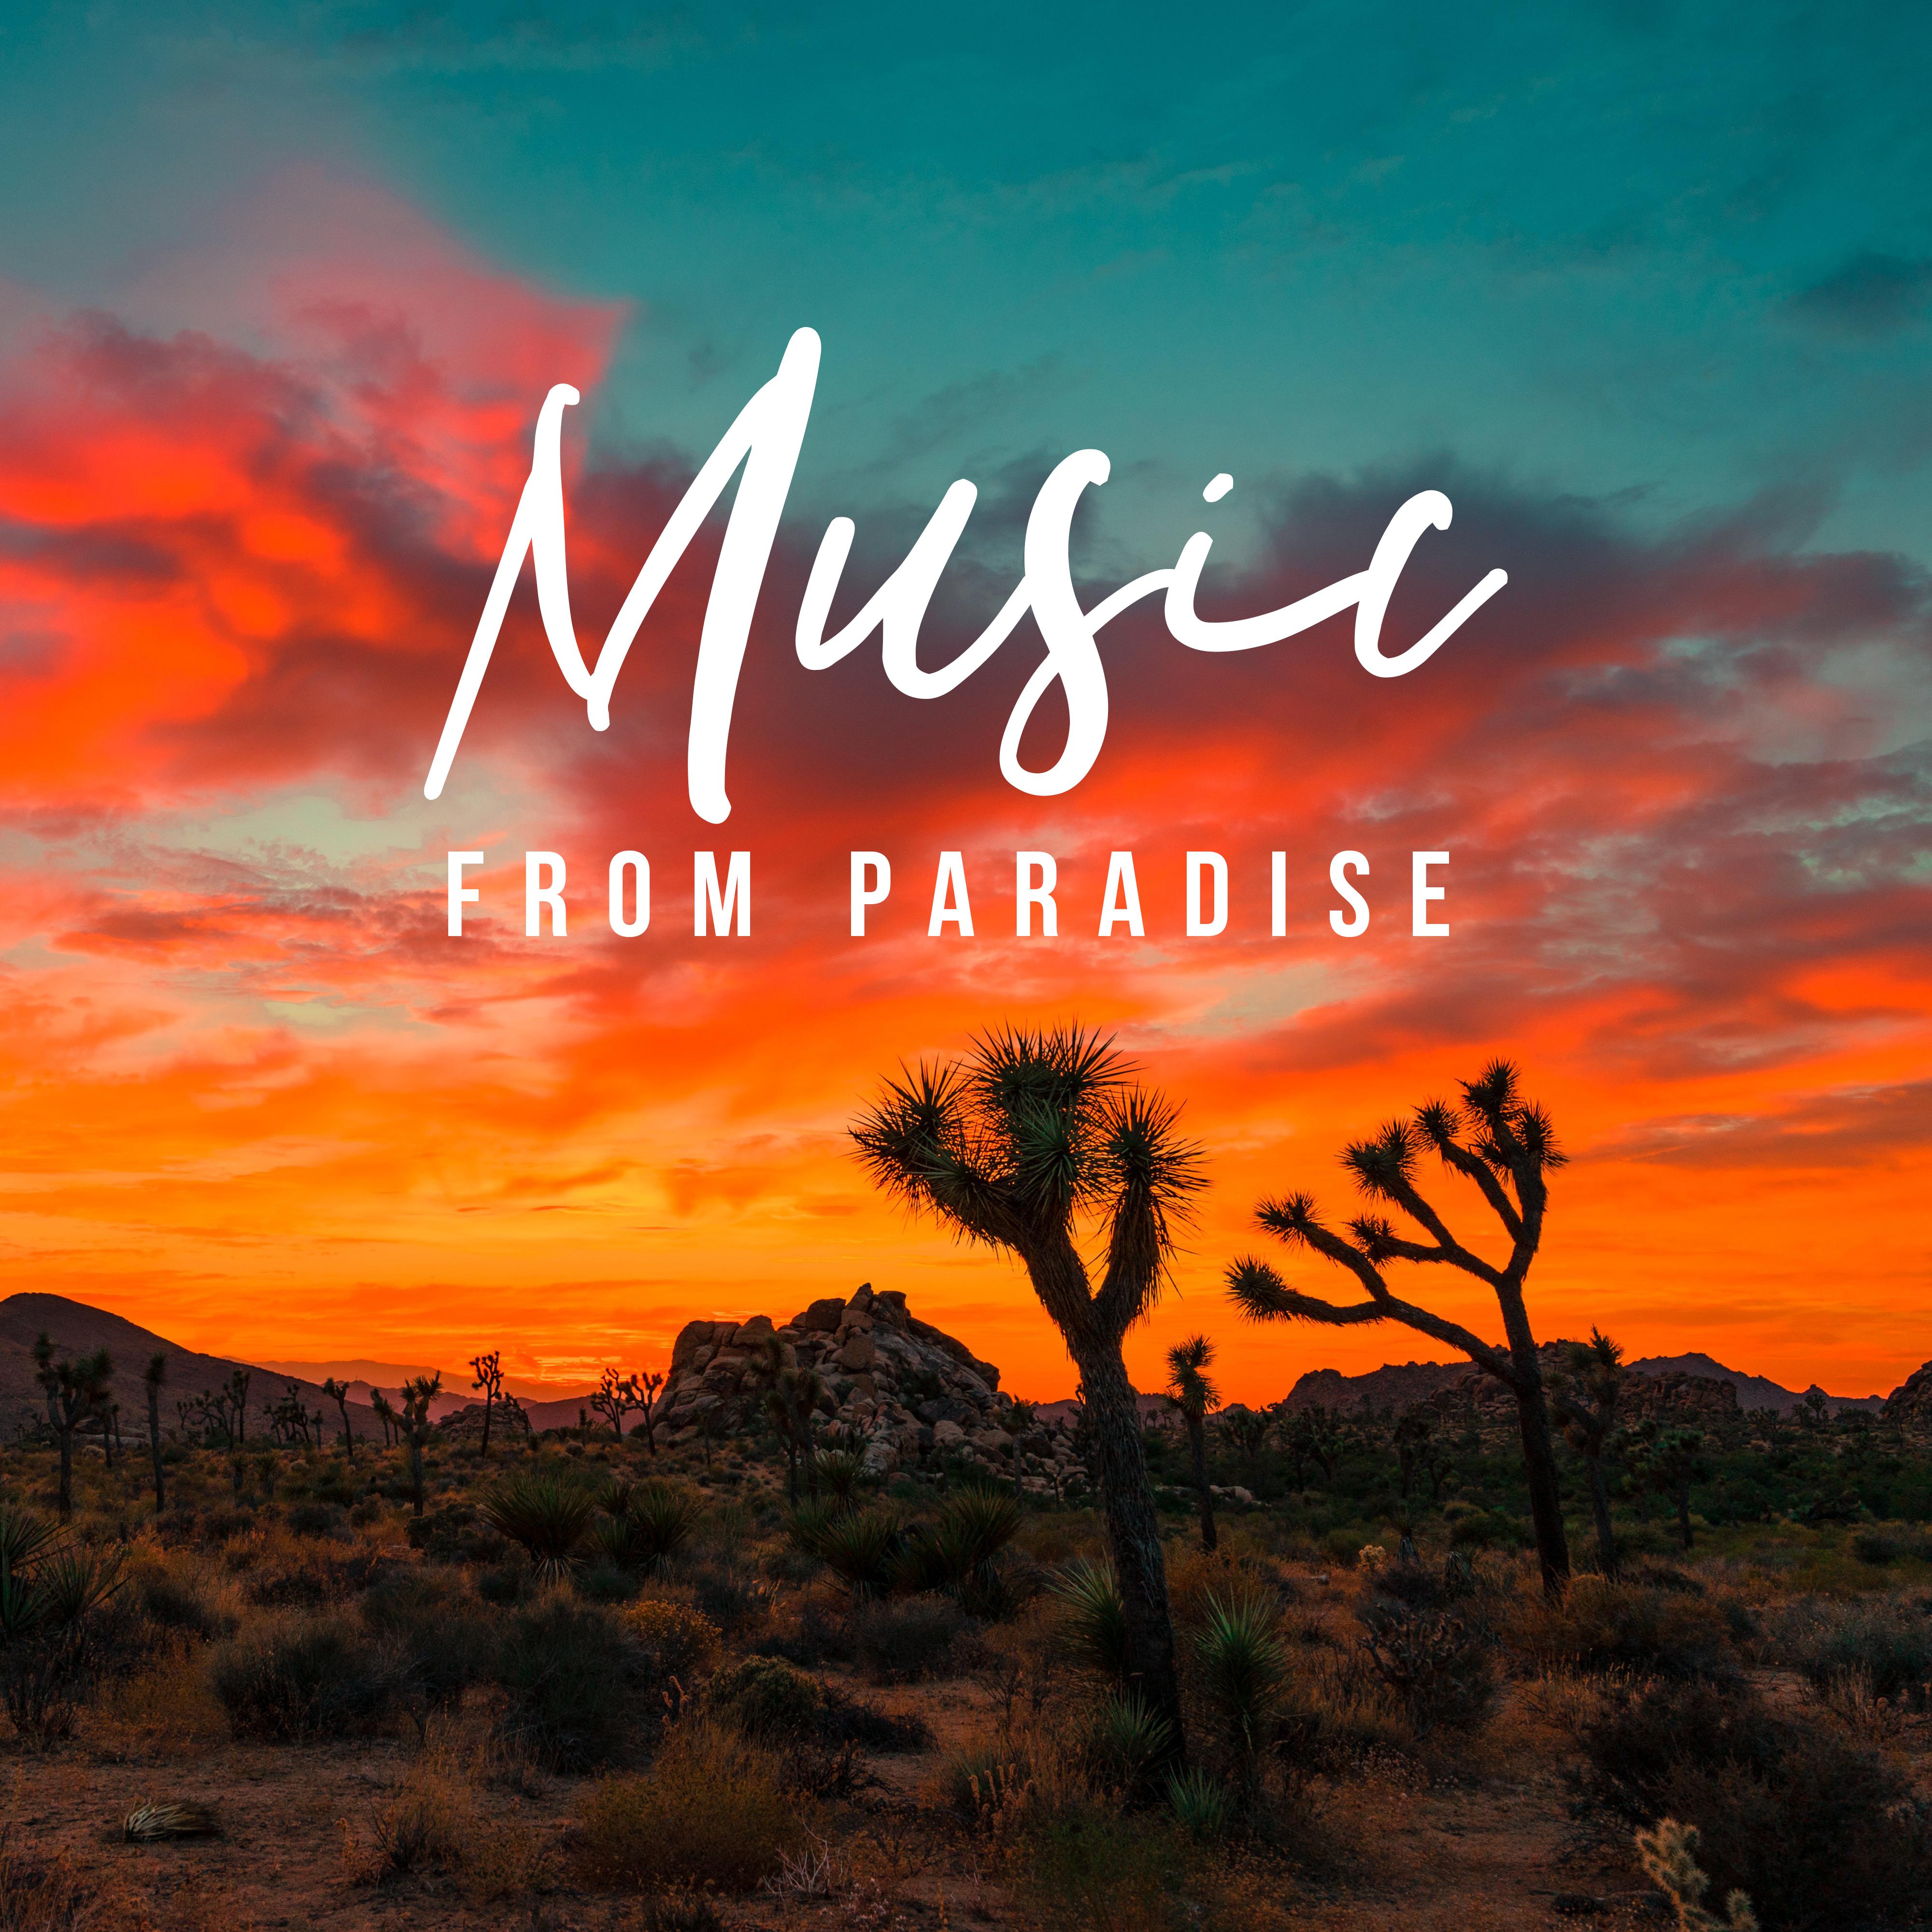 Music from Paradise: Soothing Music to Relax and Unwind, Chillout Songs for the Summer 2019, Vacations on the Islands, Paradise Sounds